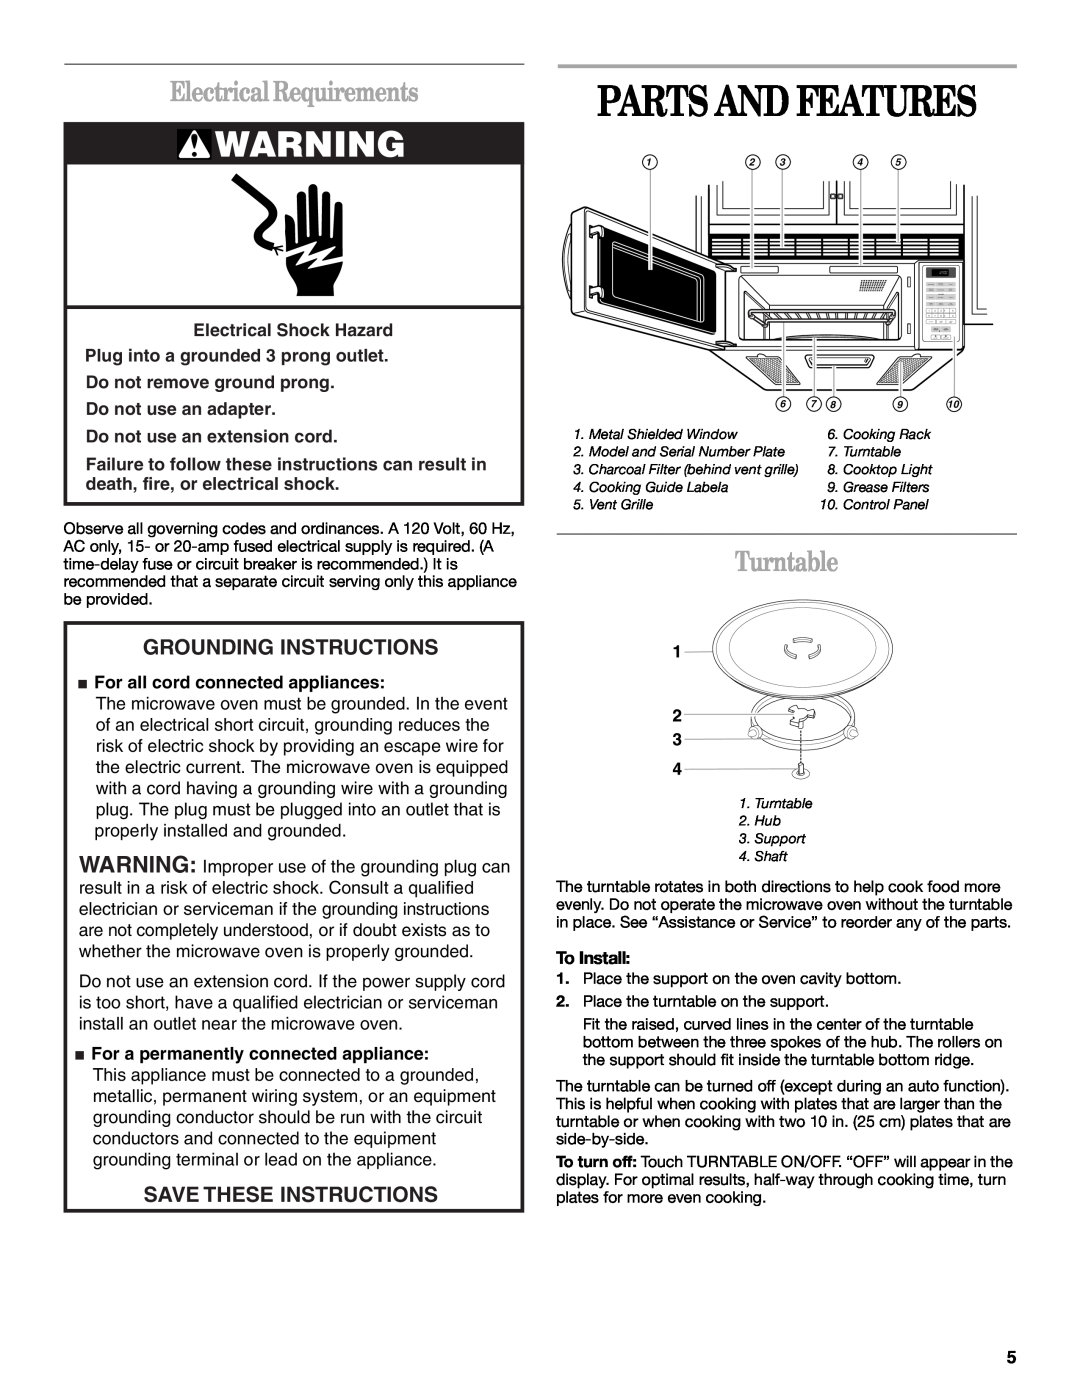 Whirlpool MH6150XL Parts And Features, Electrical Requirements, Turntable, Grounding Instructions, Save These Instructions 